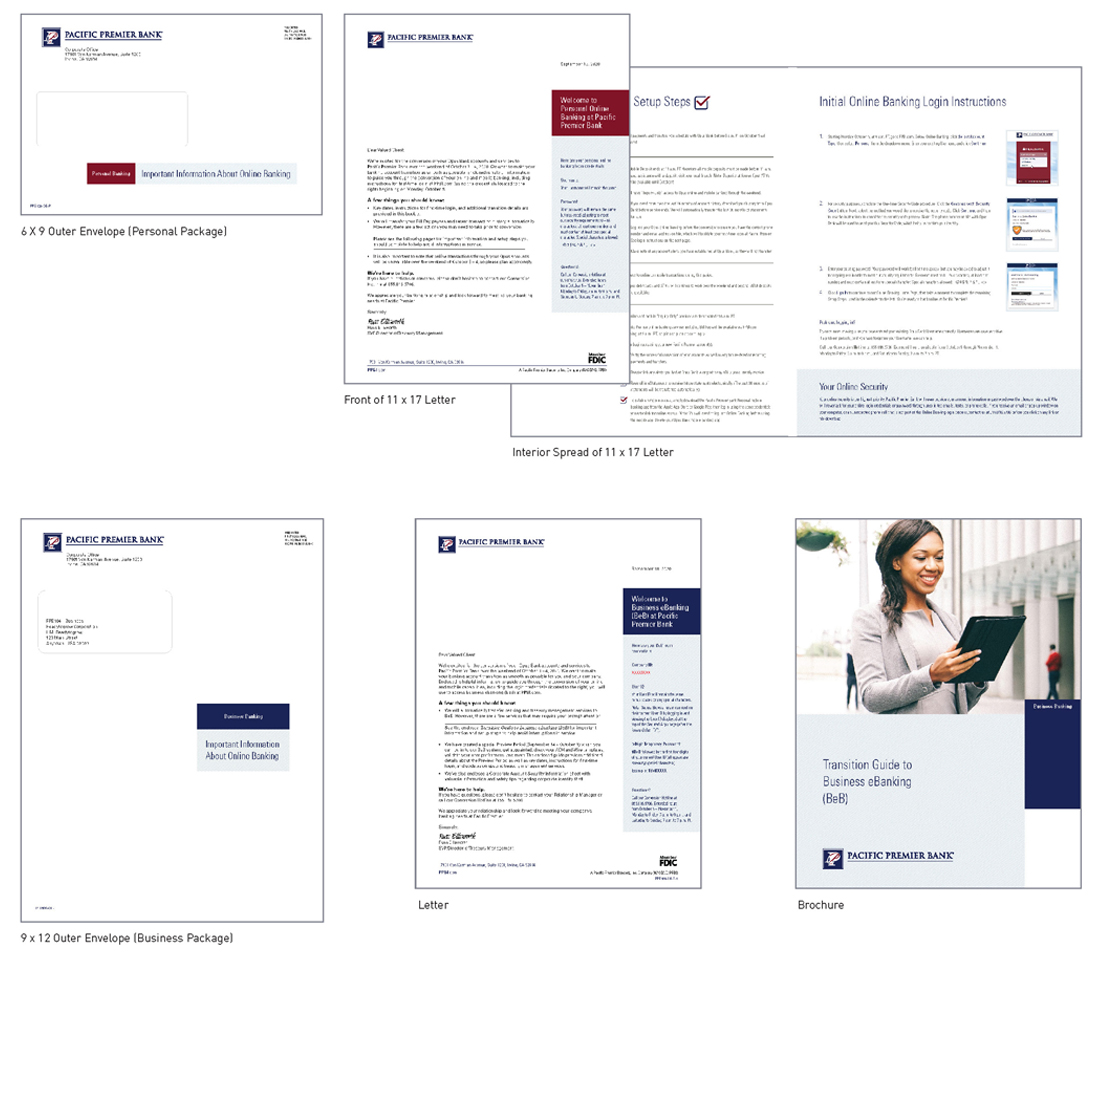 Pacific Premier Bank online banking conversion business envelope, letter and brochure, and personal envelope and letter